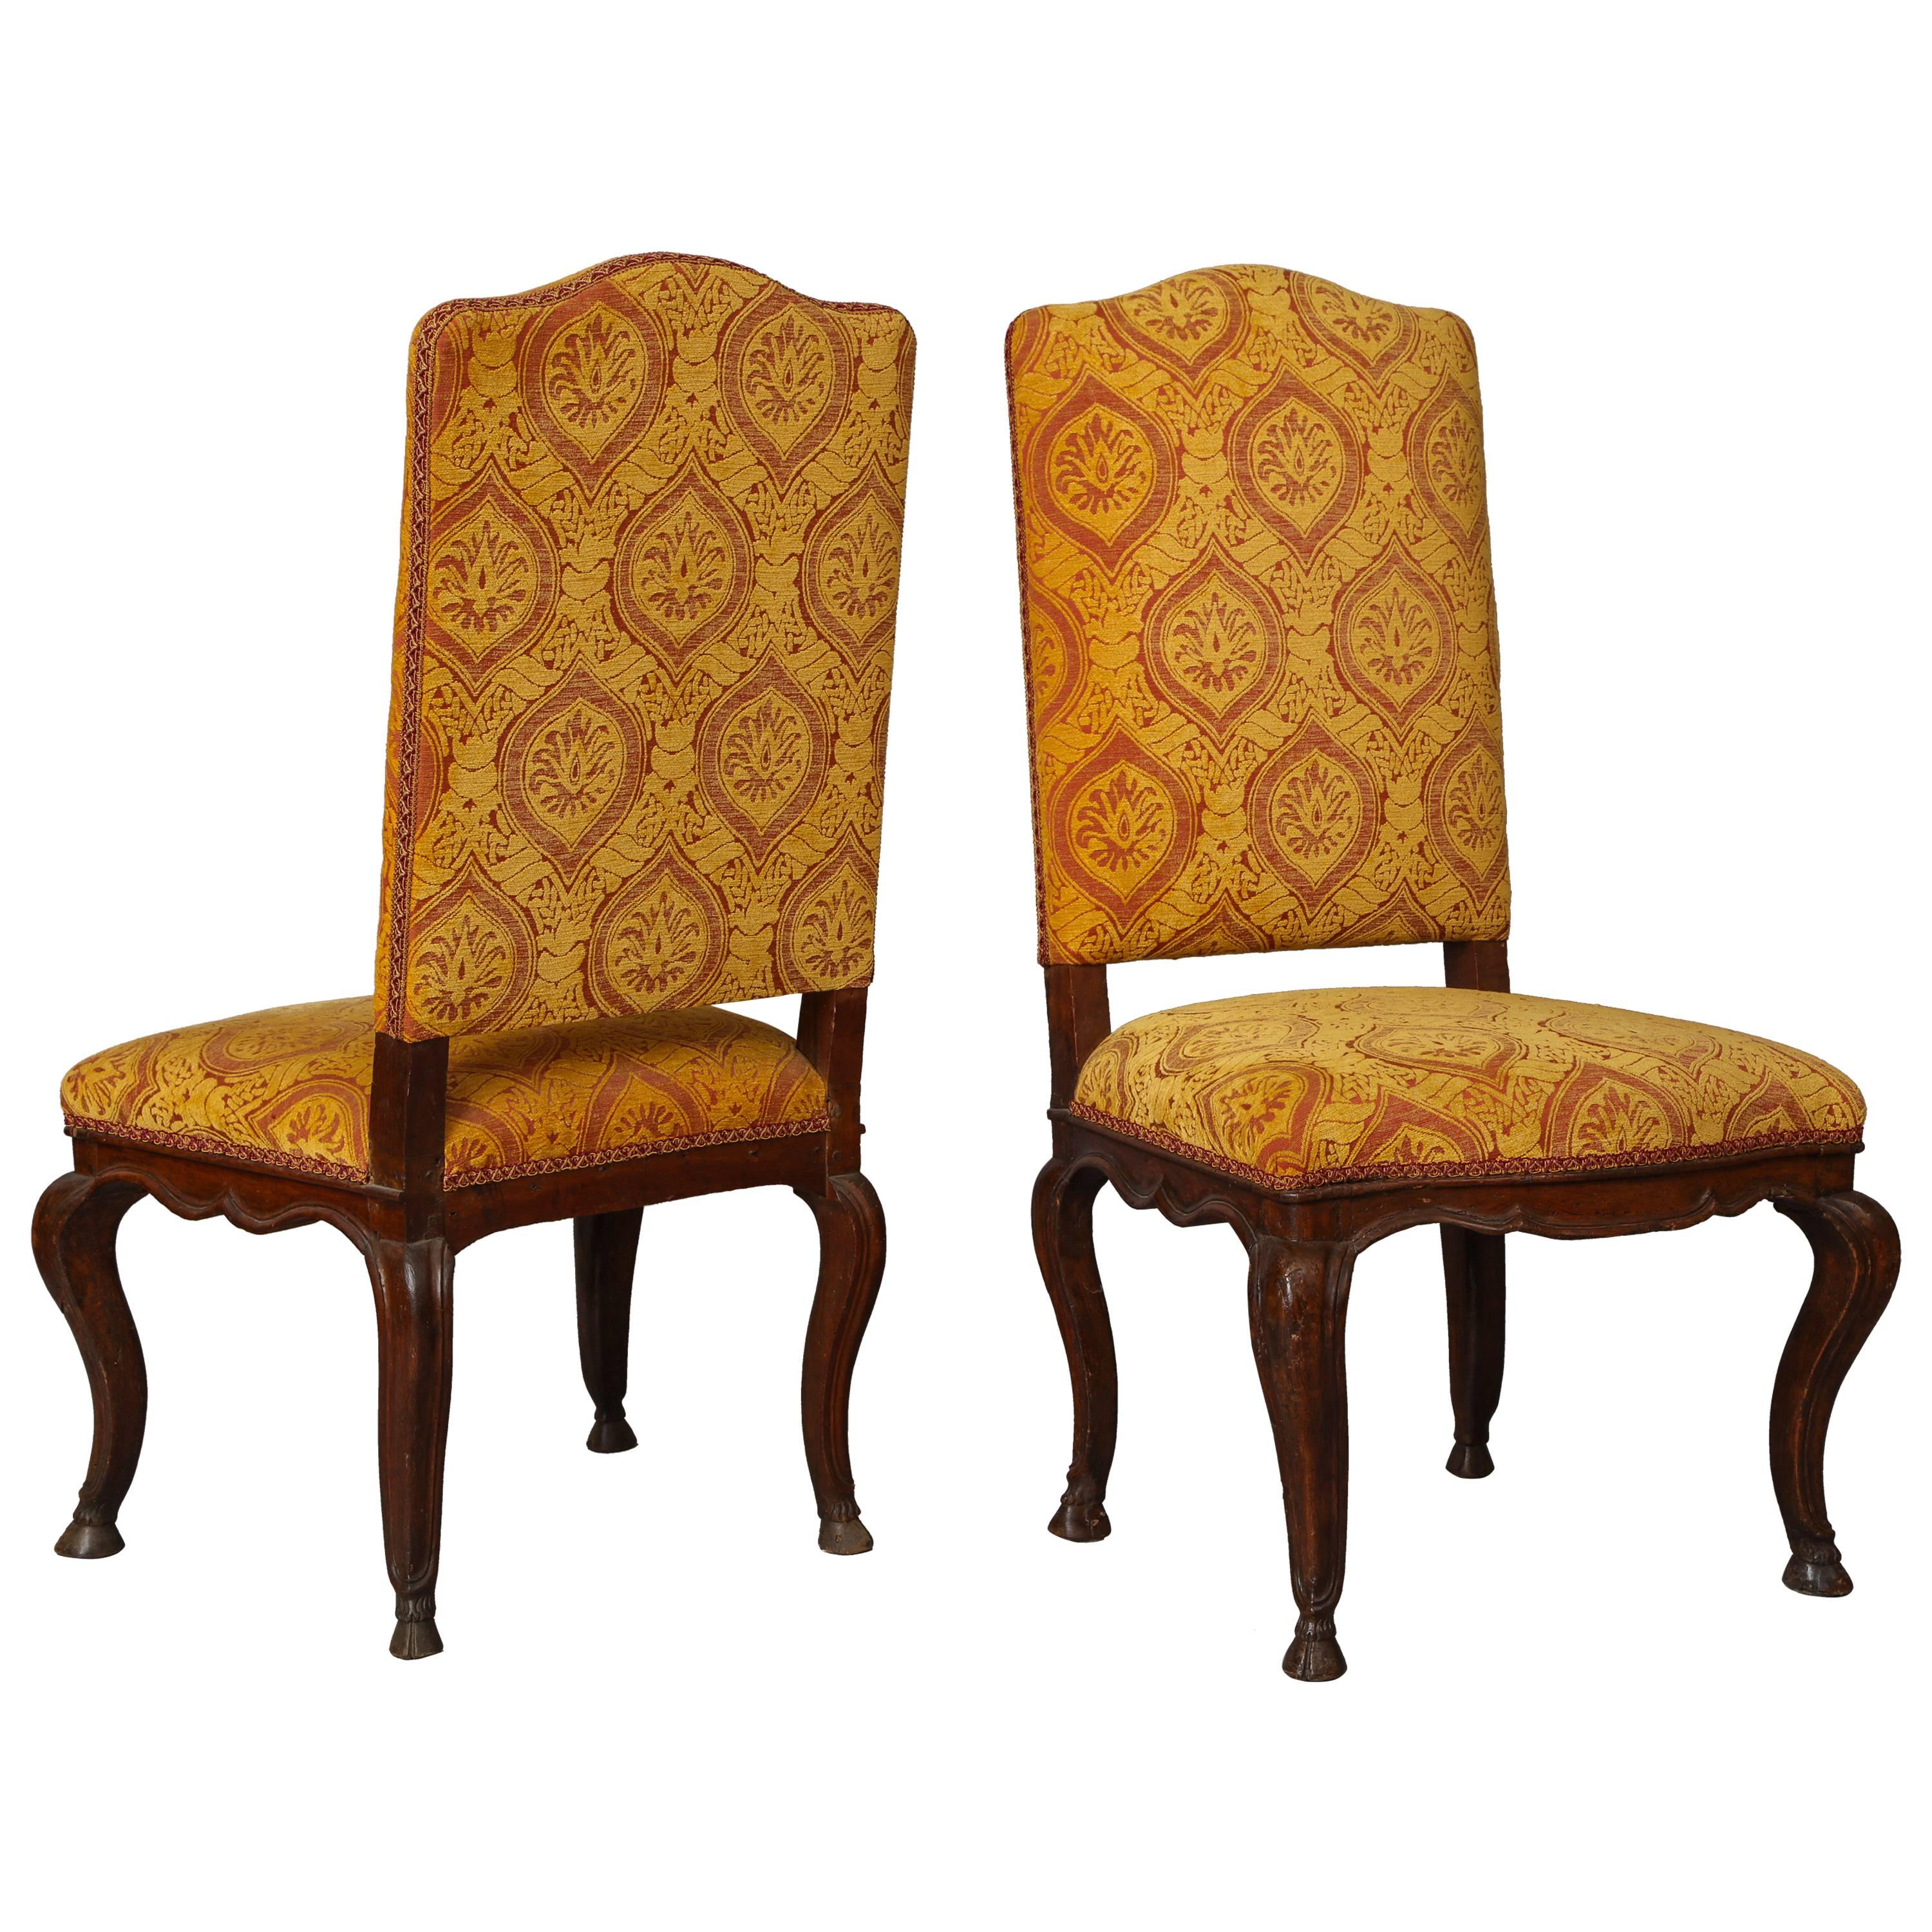 Italian Early 18th Century Pair of Carved Walnut Side Chairs